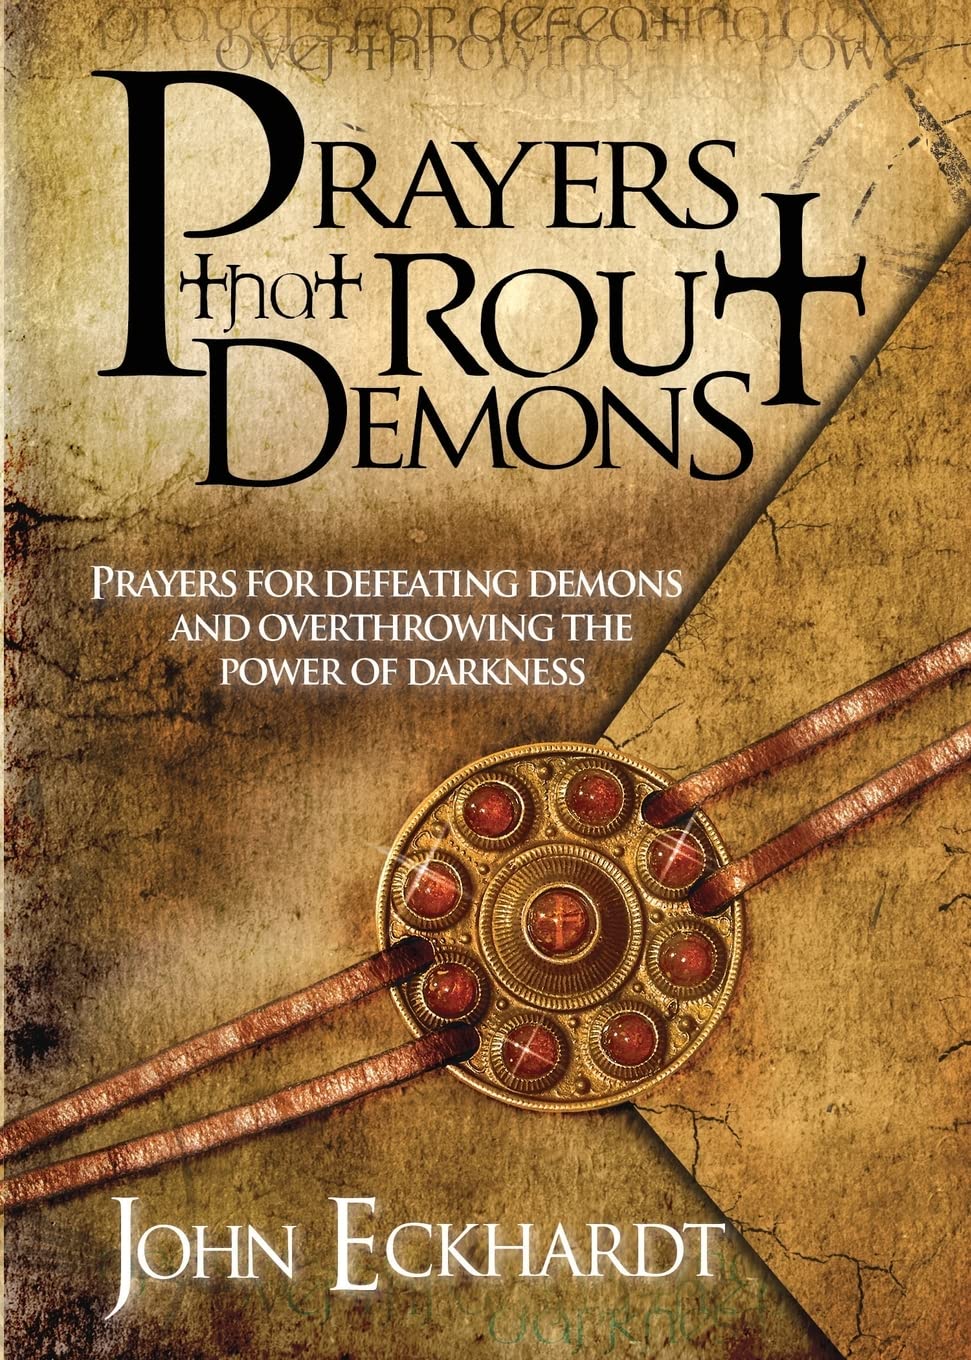 Prayers That Rout Demons: Prayers for Defeating Demons and Overthrowing the Power of Darkness by Eckhardt, John